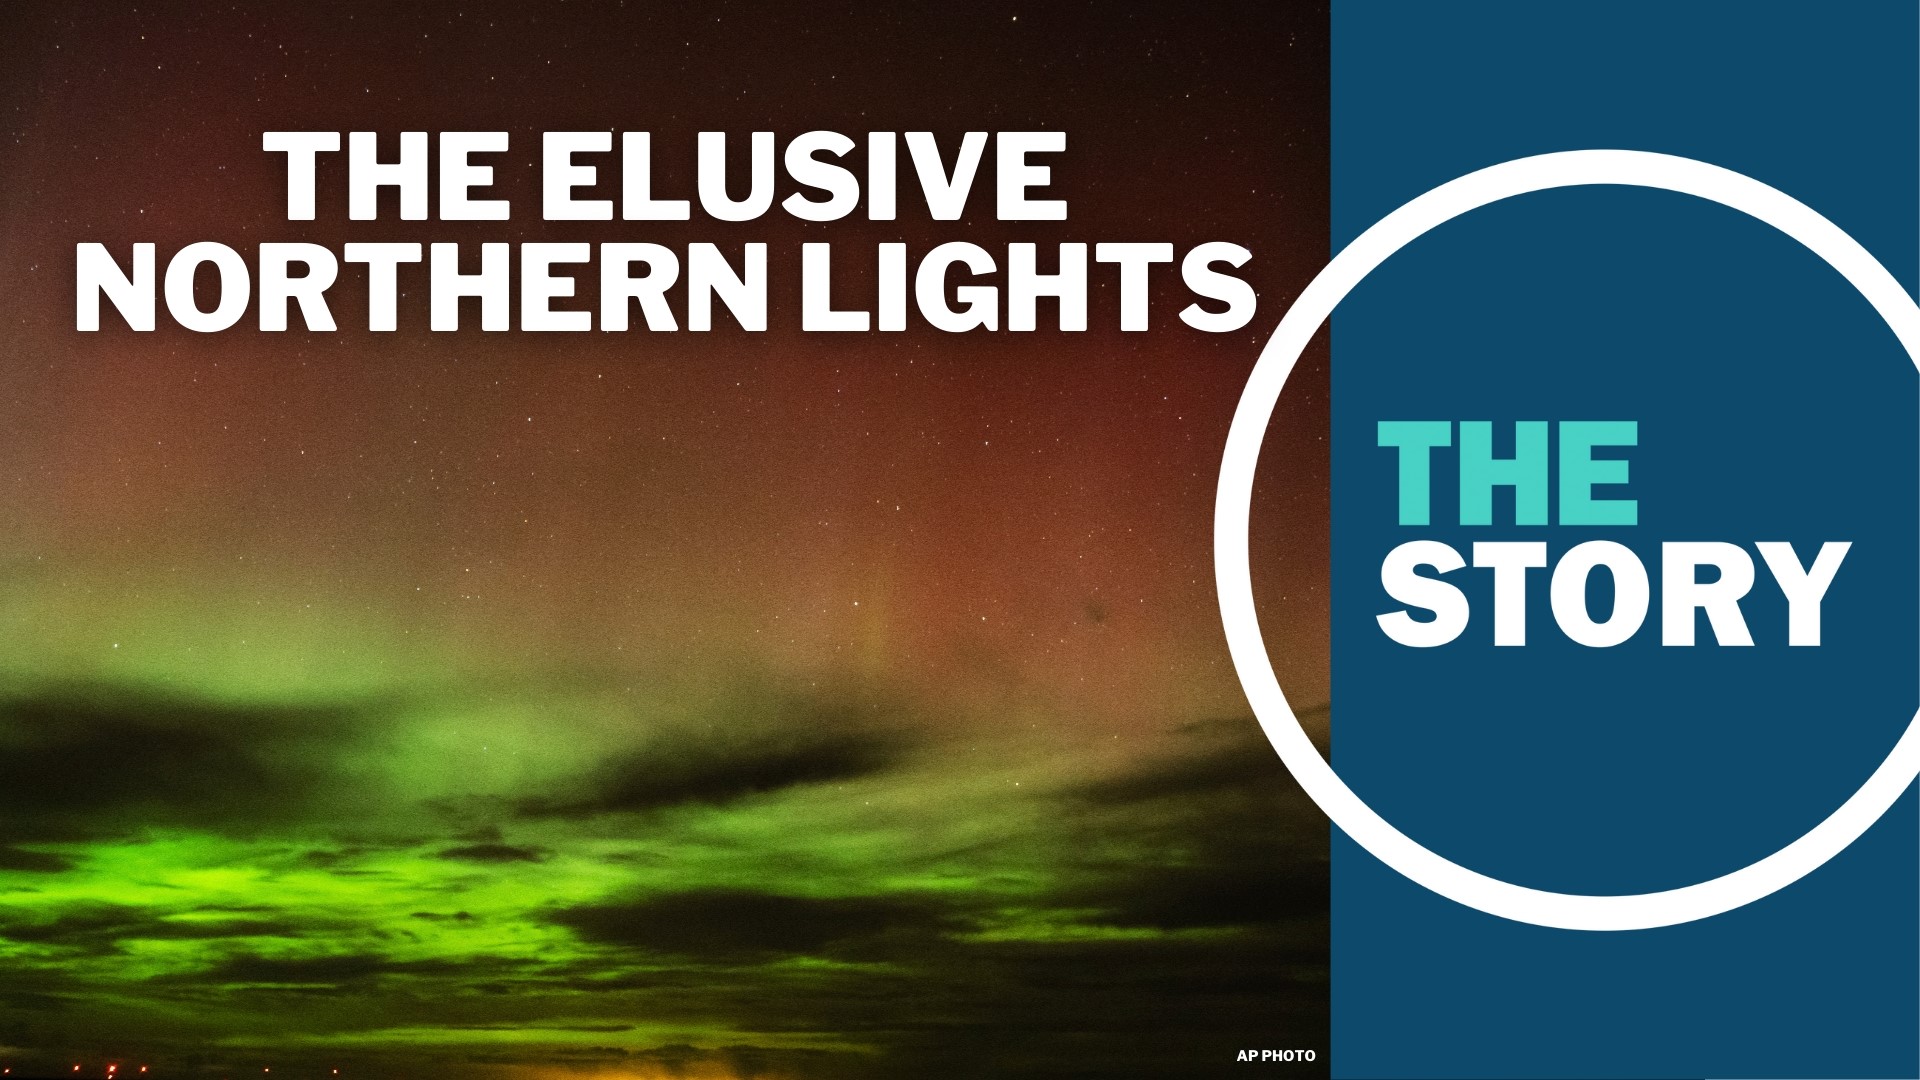 What to know about seeing the northern lights from WA